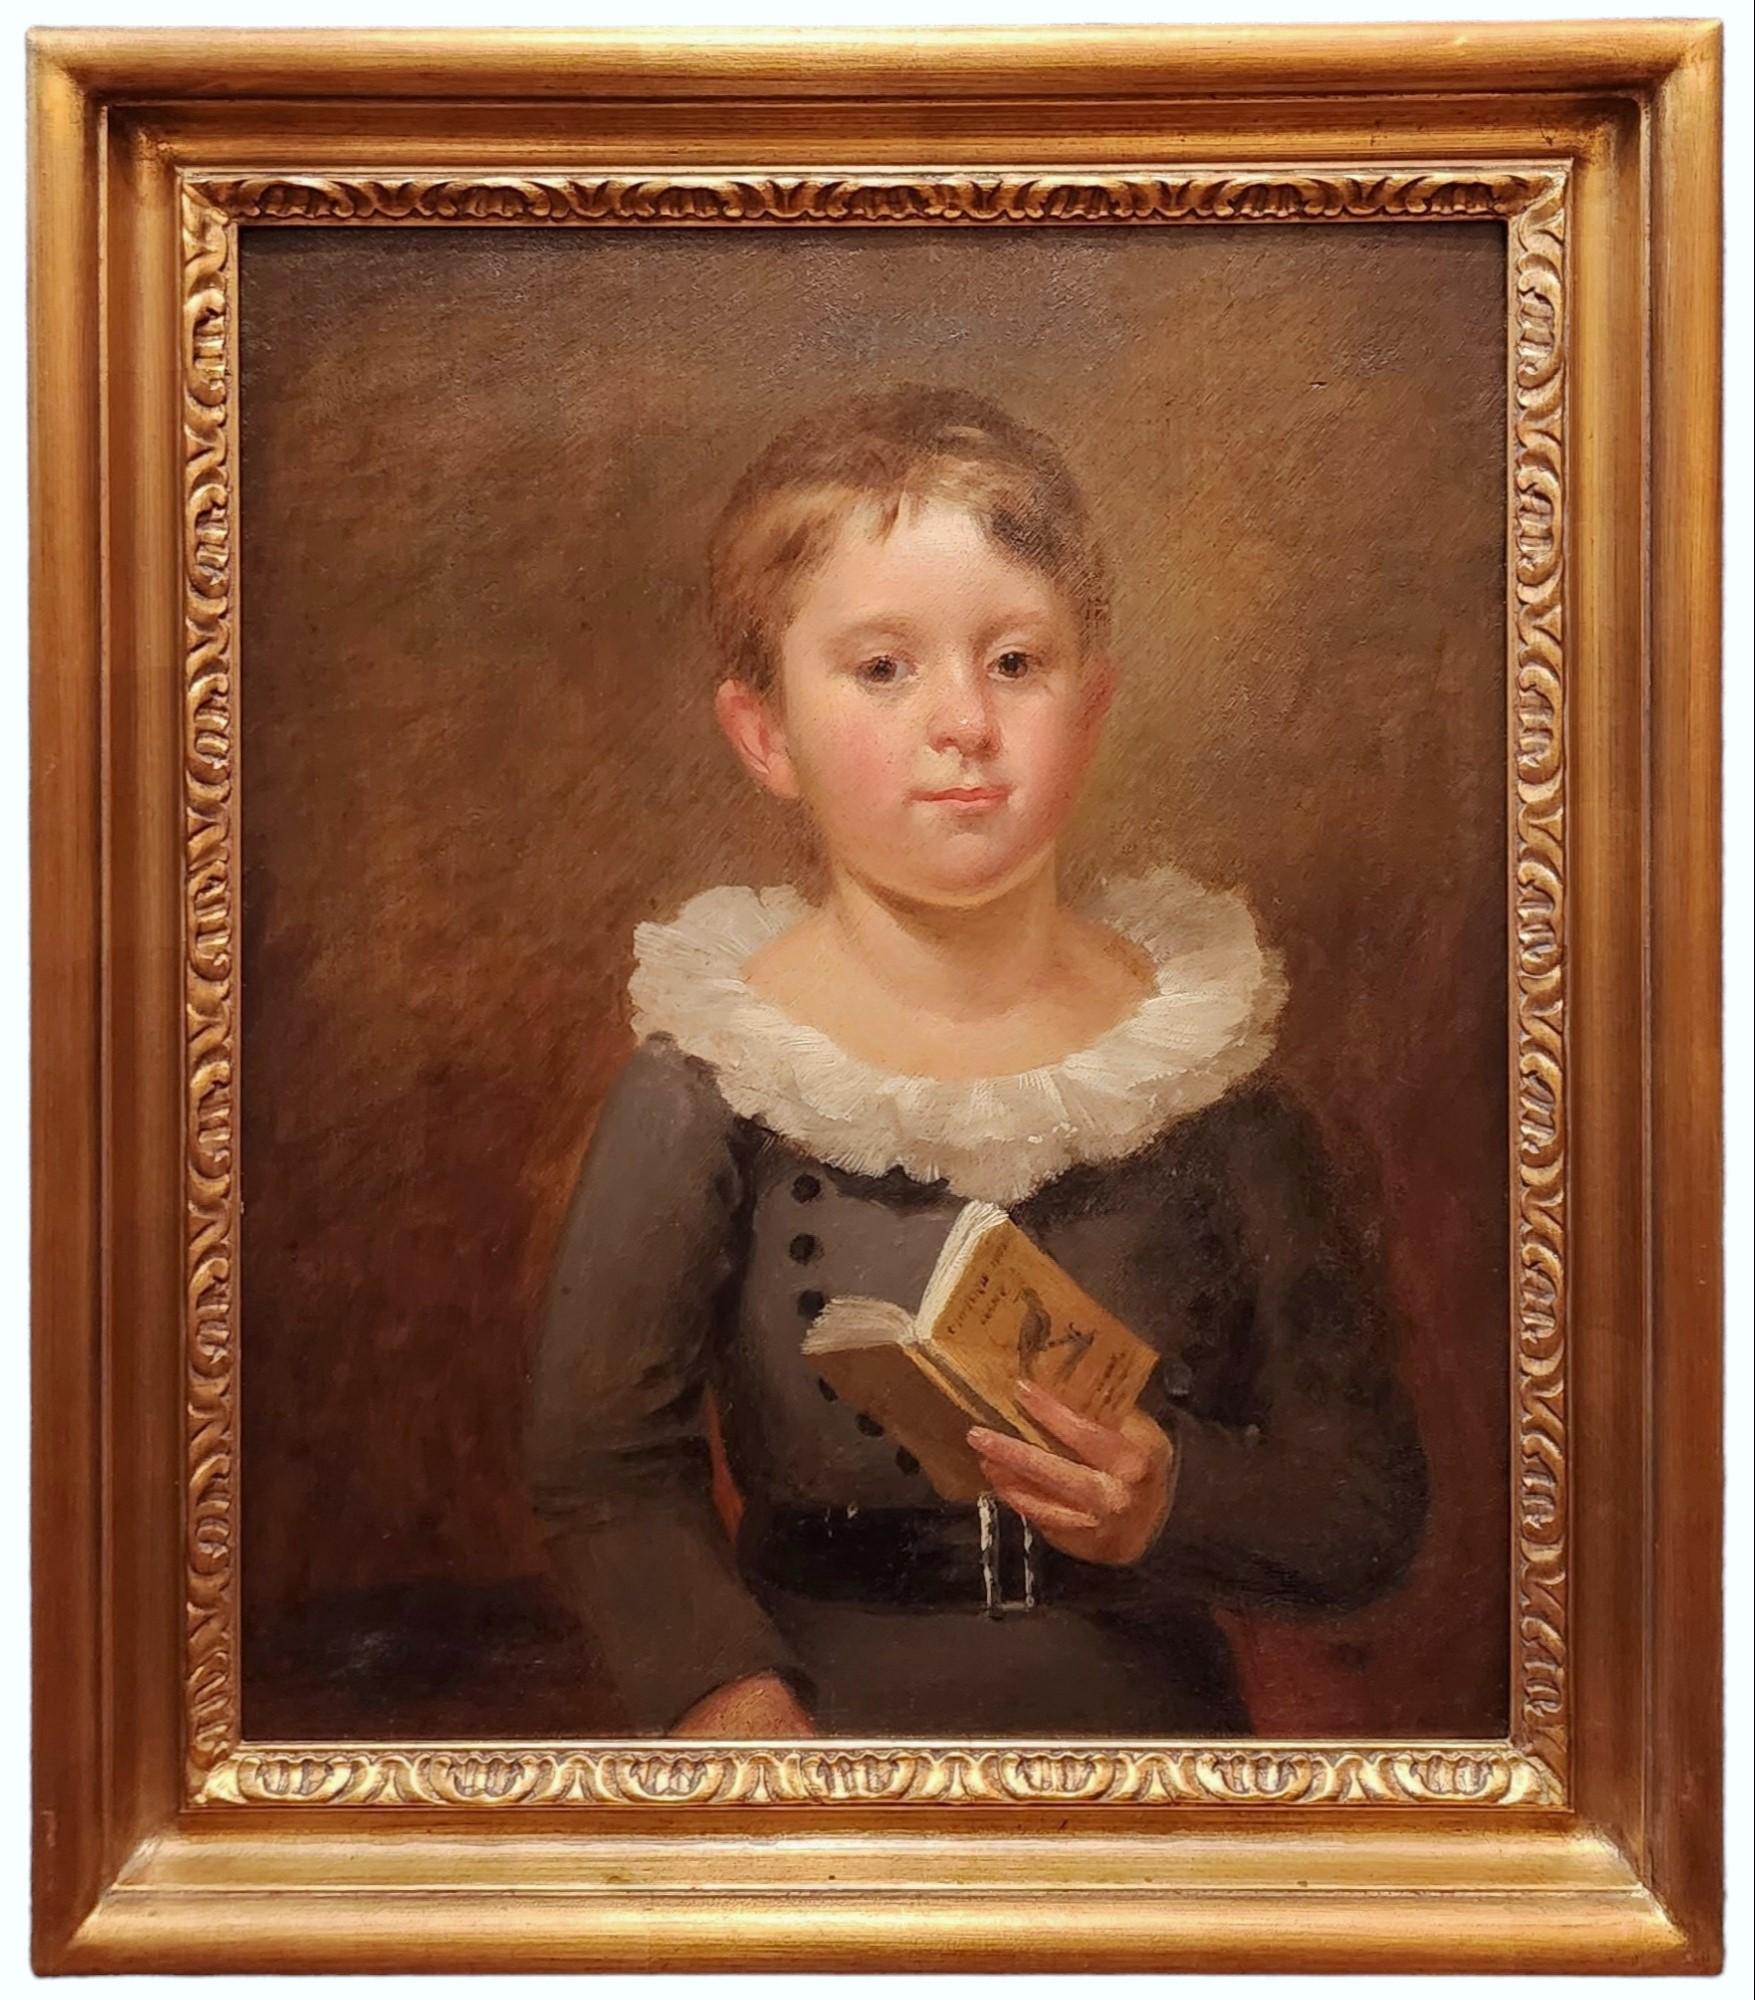 Unknown Portrait Painting - Portrait of a Boy Holding a Book, Early American Portraiture, American Folk Art